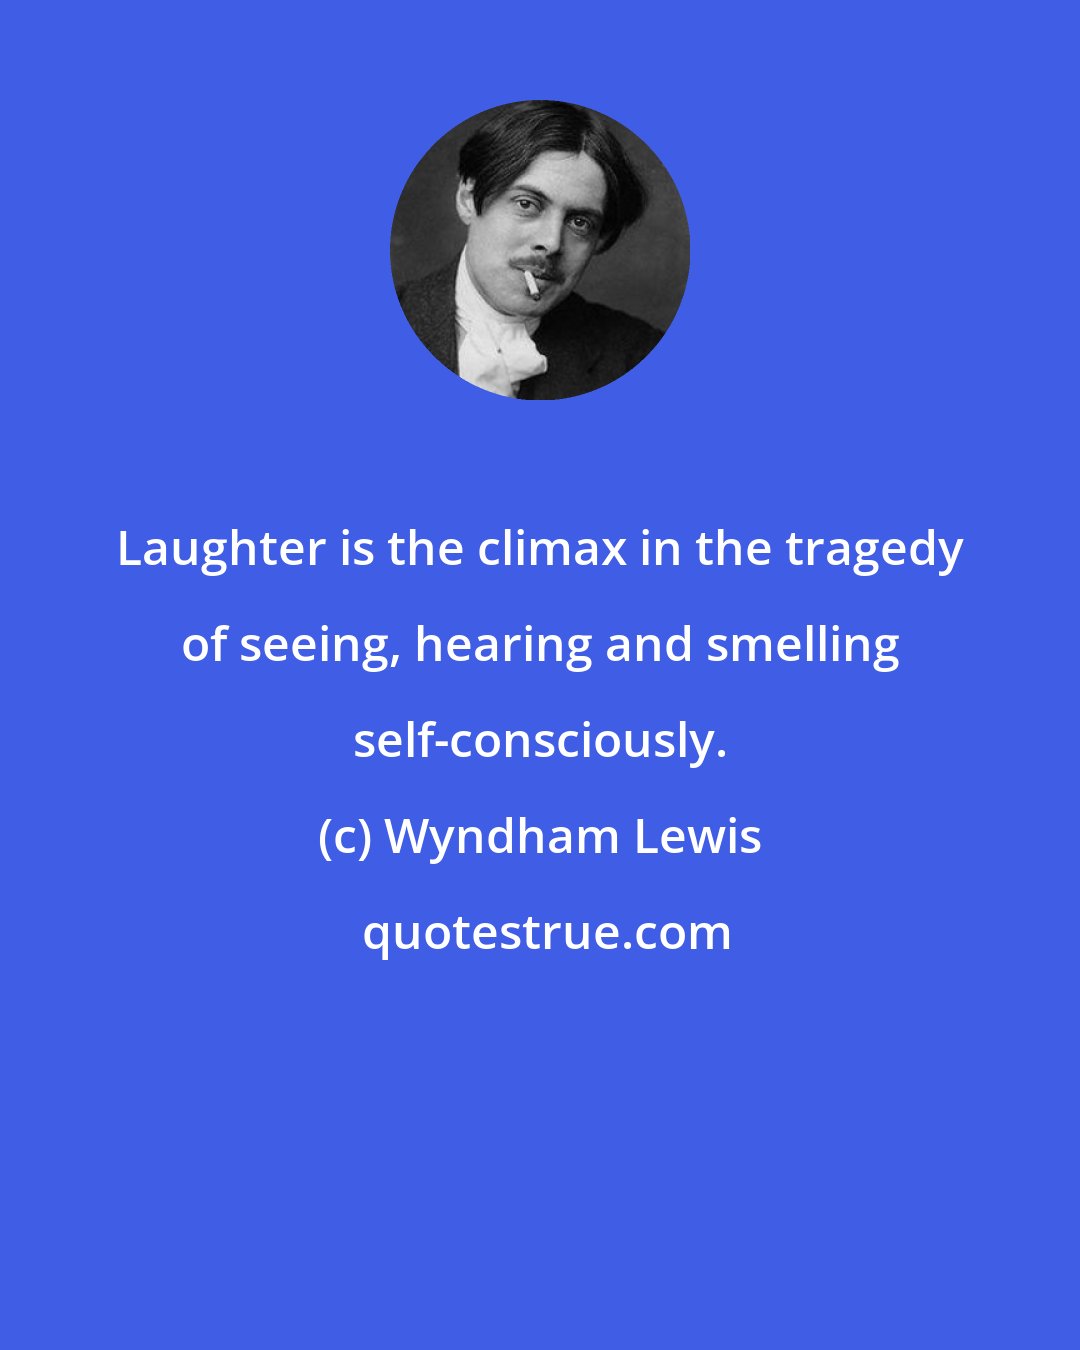 Wyndham Lewis: Laughter is the climax in the tragedy of seeing, hearing and smelling self-consciously.